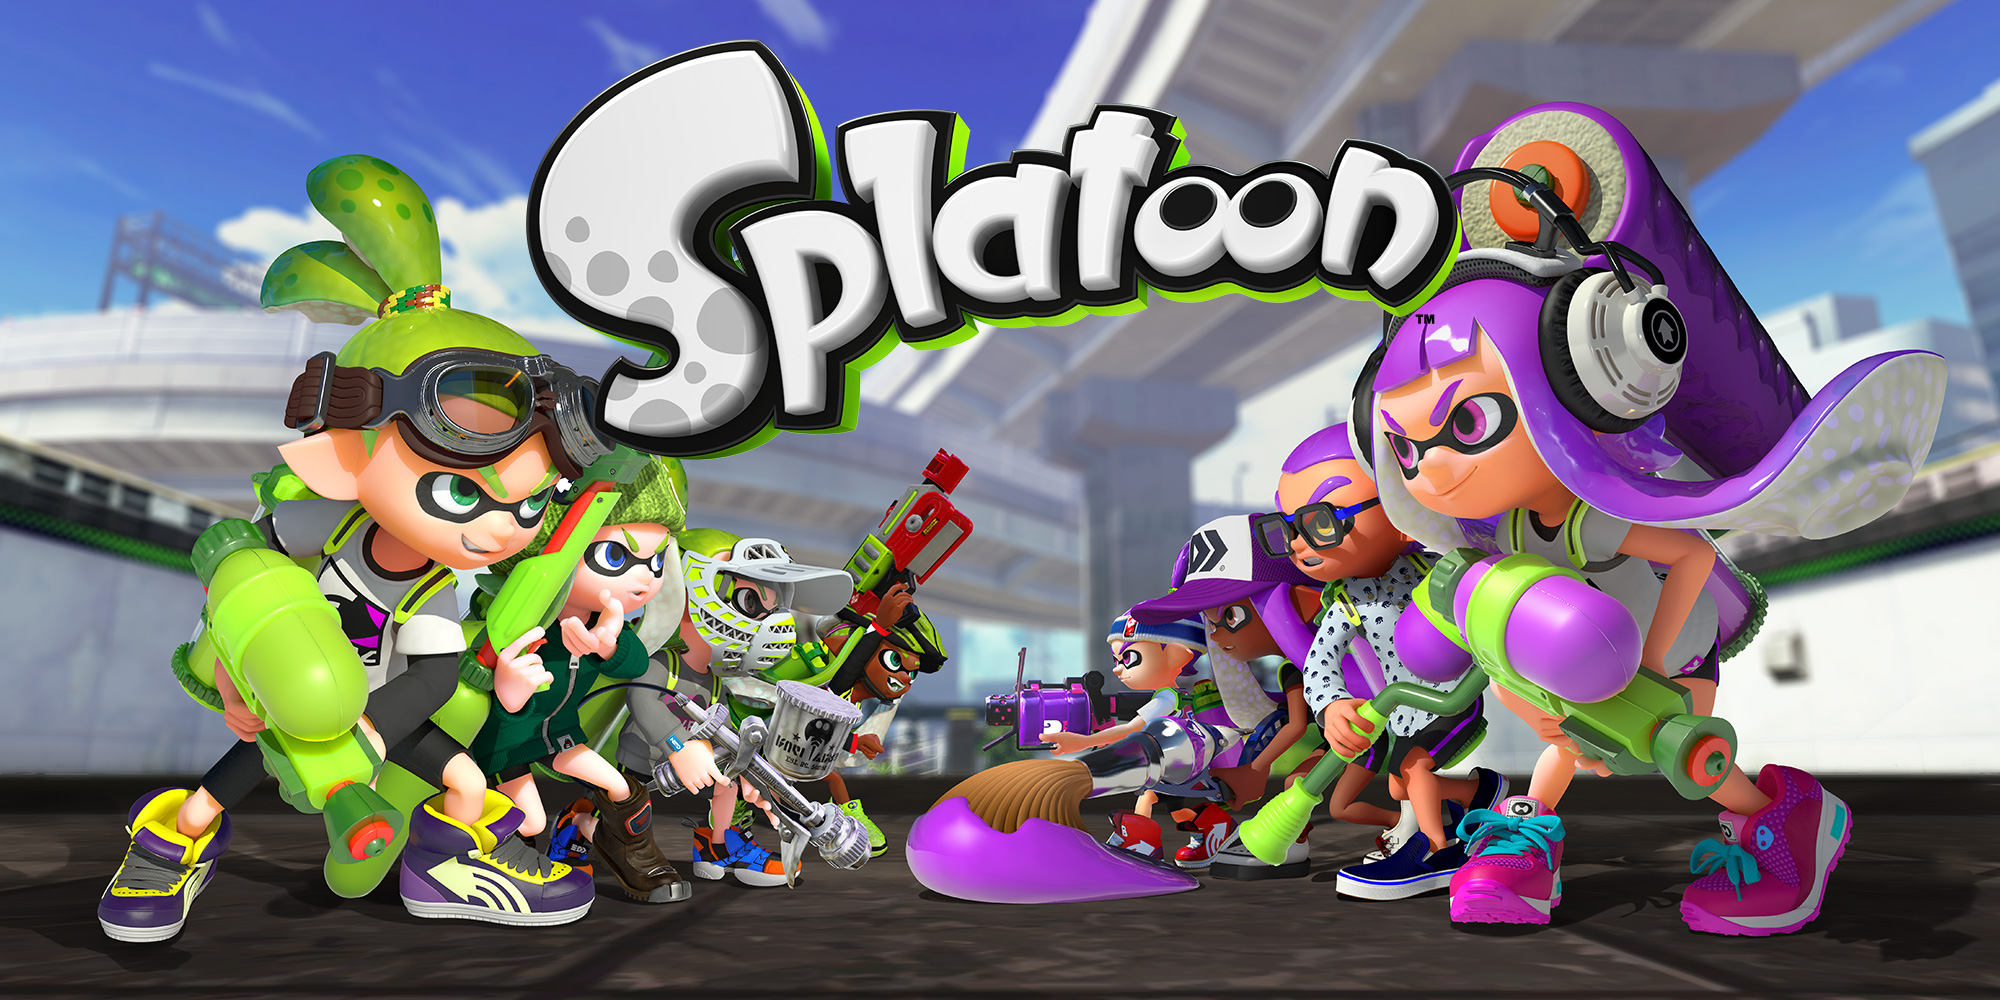 Cover art for Splatoon for the WiiU; A team of Green Squid Kids faces off against a team of Purple Squid Kids.